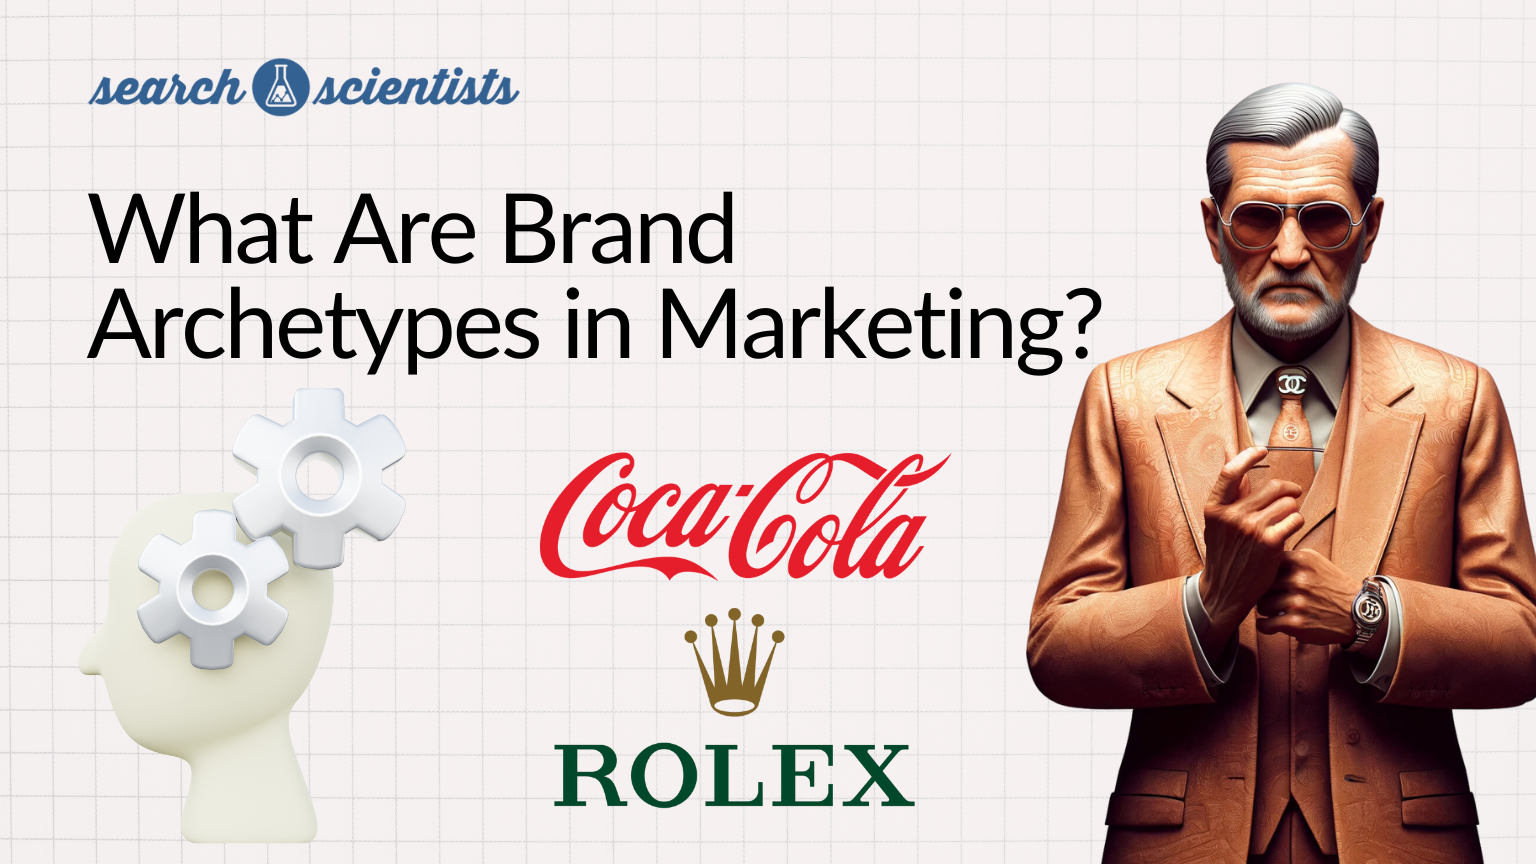 What Are Brand Archetypes in Marketing?